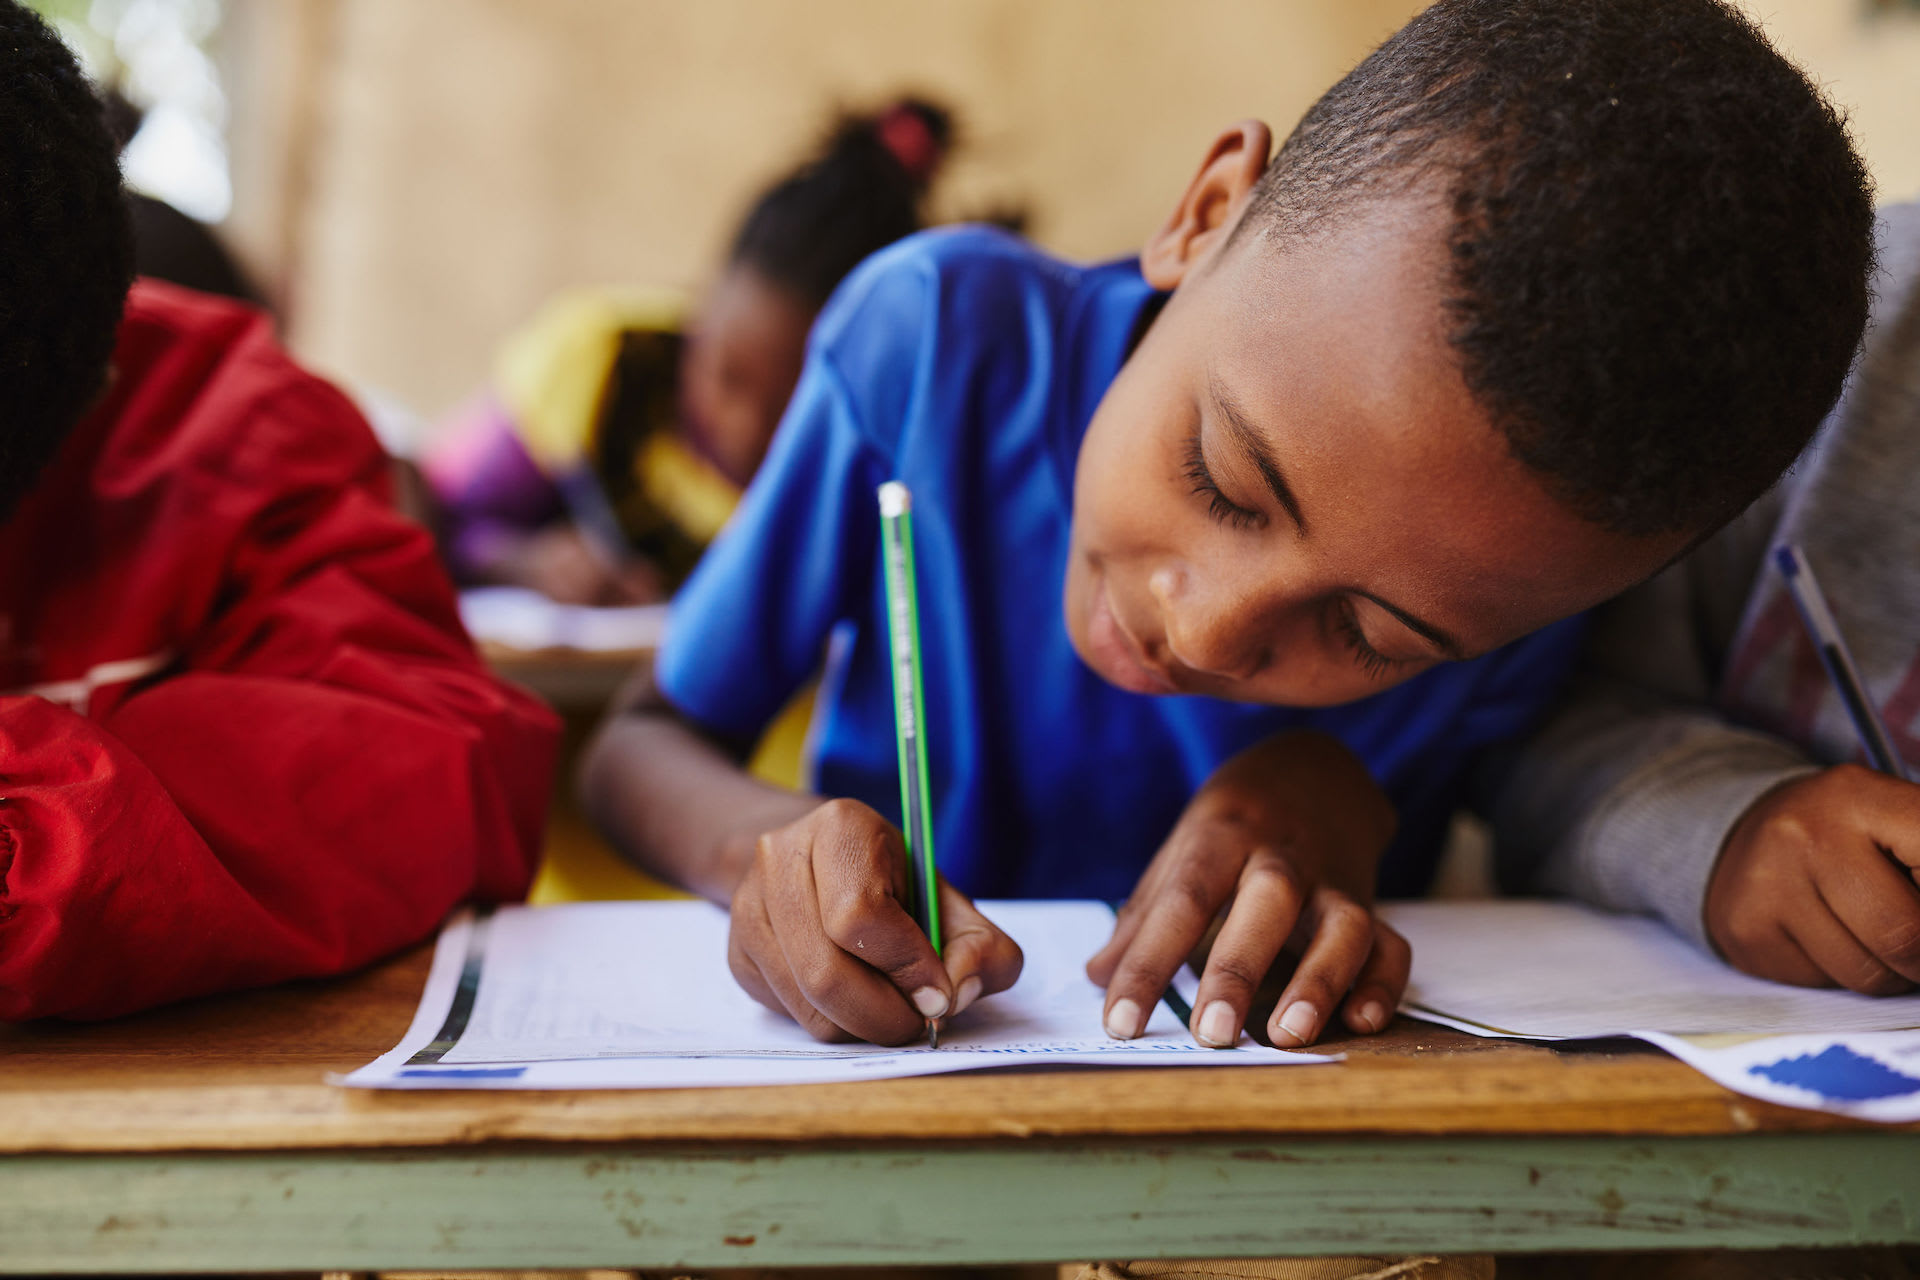 An Ethiopian boy in a blue shirt works on a letter to his sponsor. He is leaning over a wooden desk, writing with a green pencil.